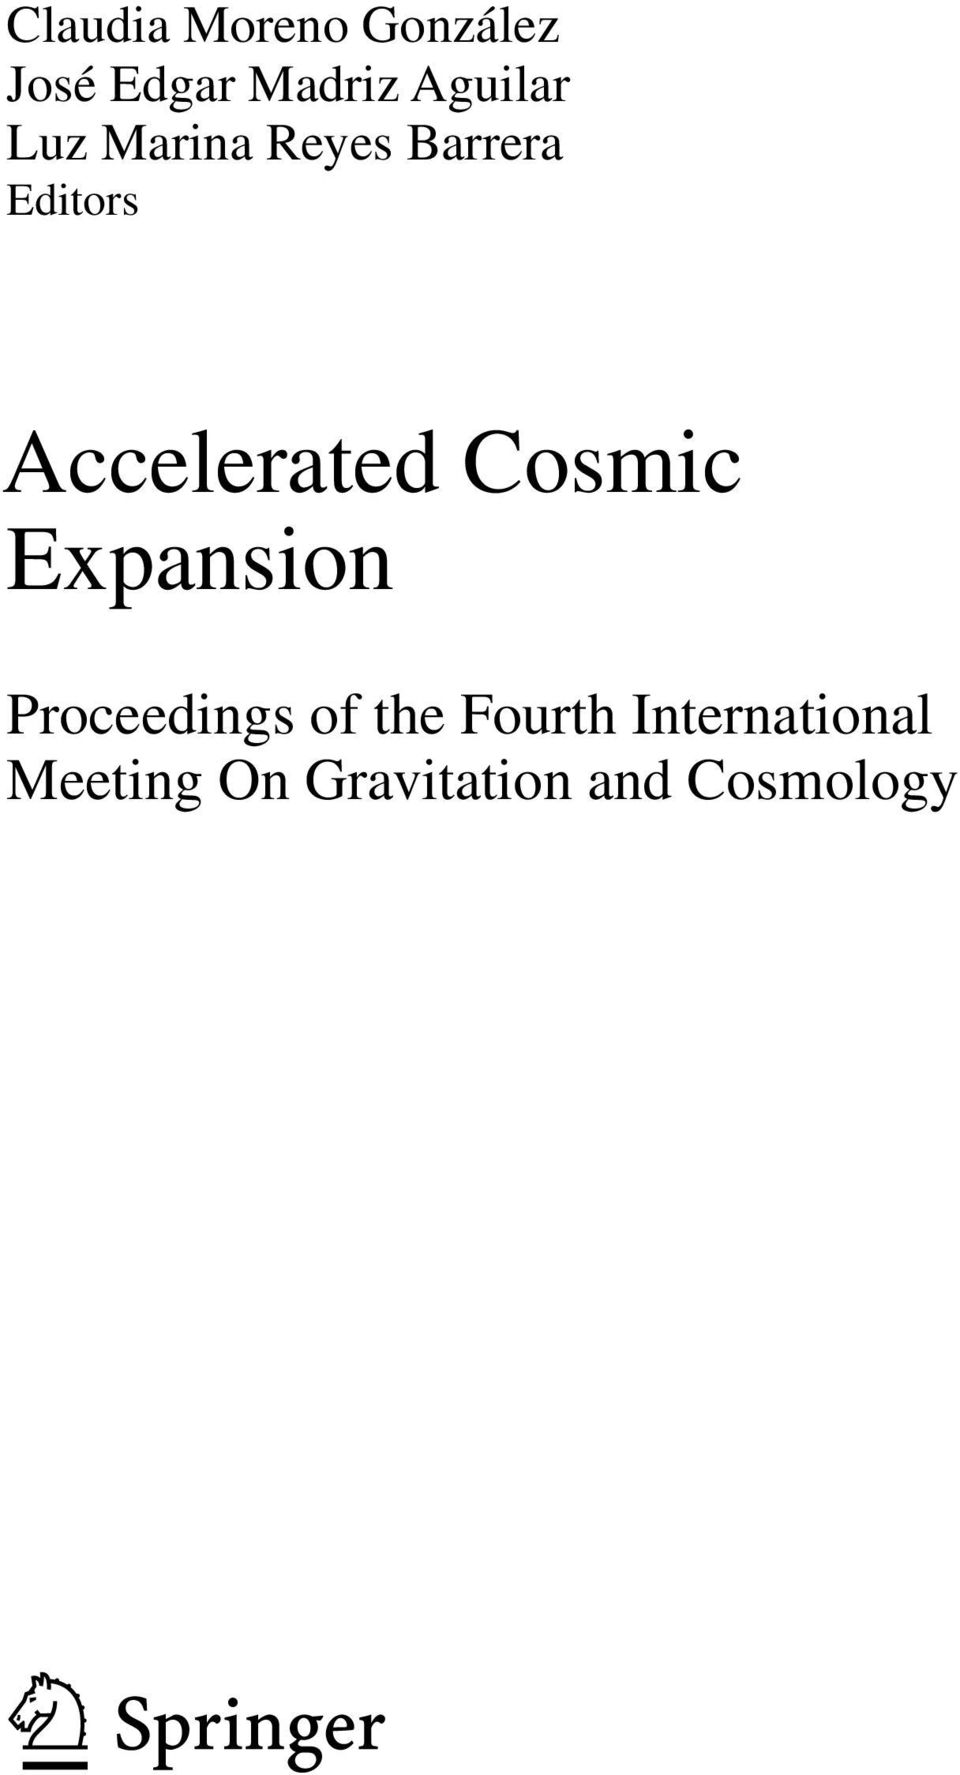 Accelerated Cosmic Expansion Proceedings of the